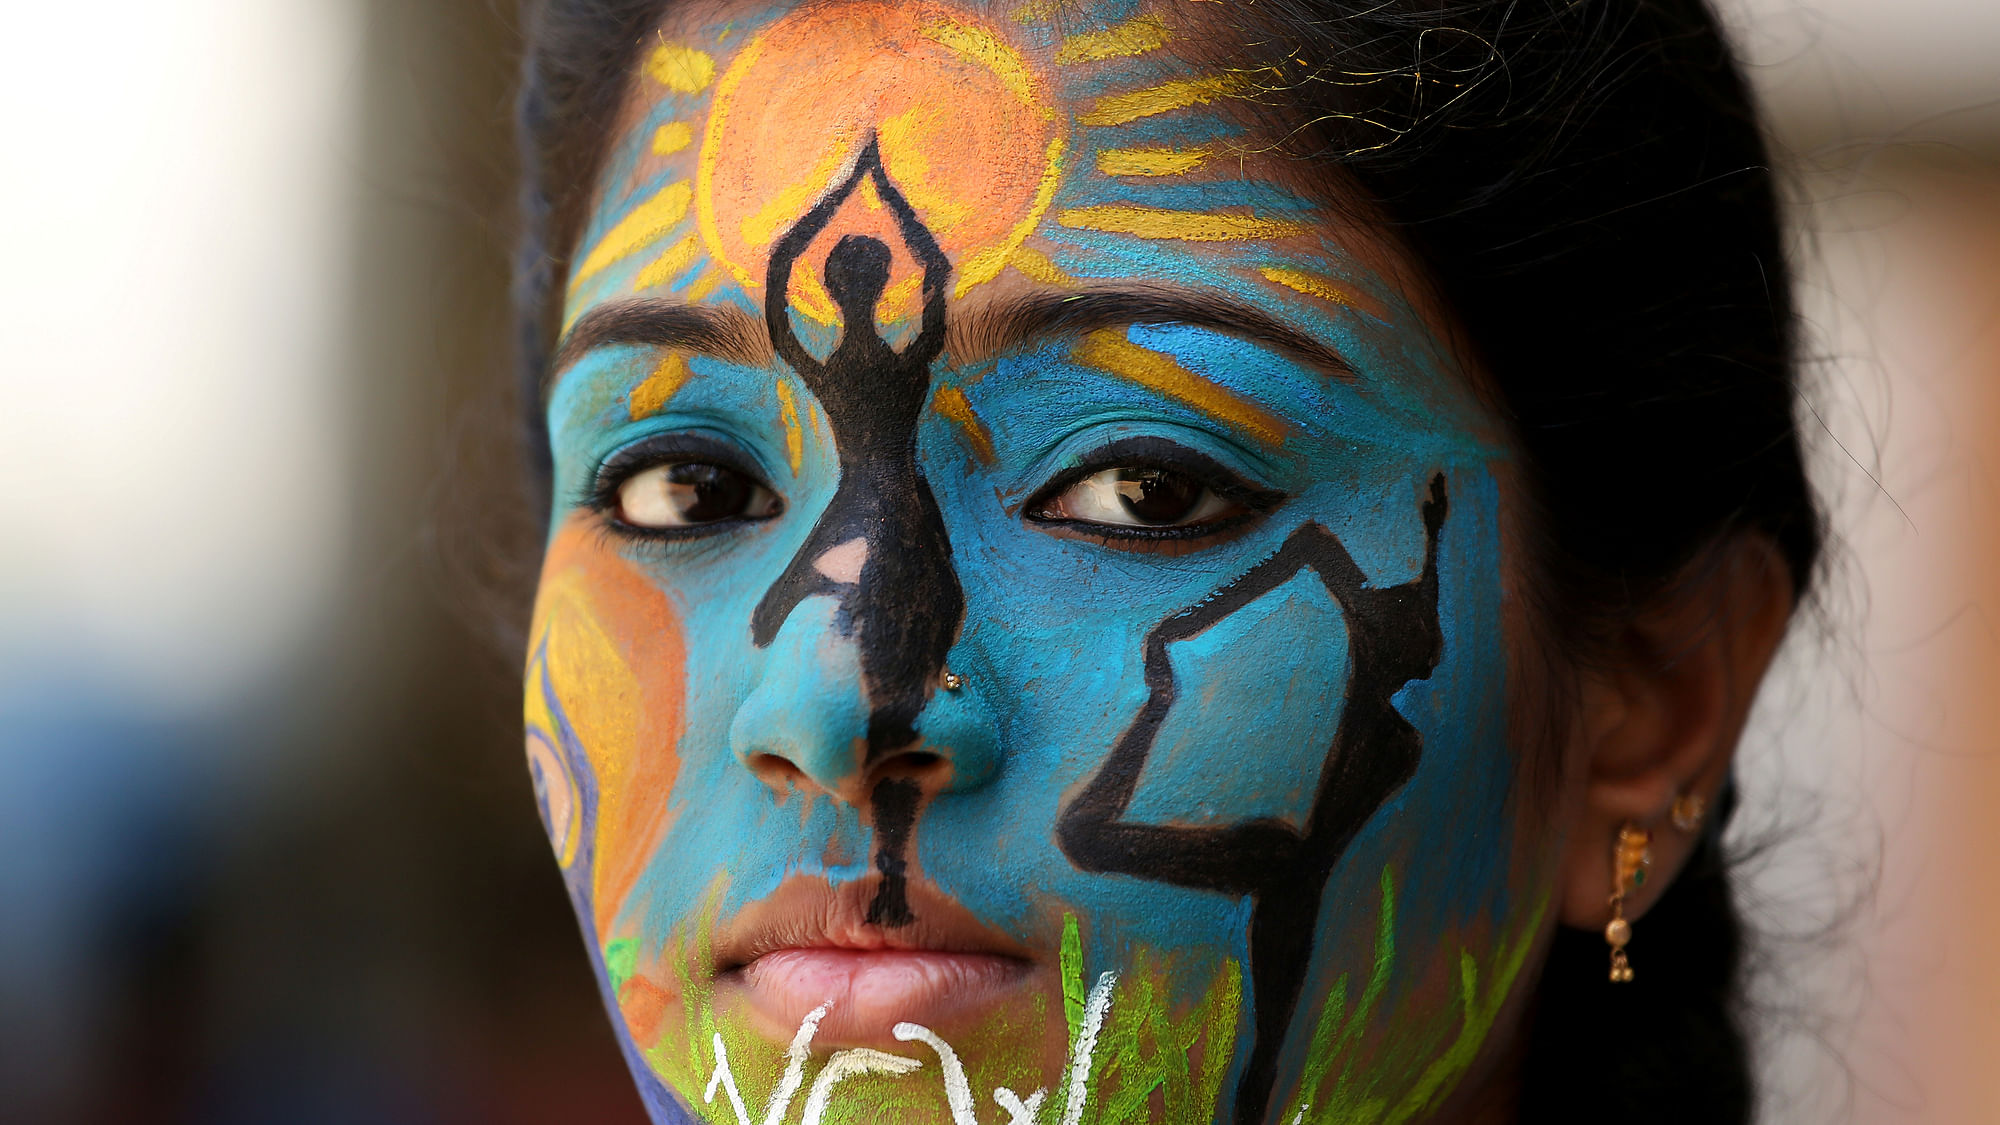 A college student poses as she displays her painted face as an awareness ahead of International Yoga Day, in Chennai, India.